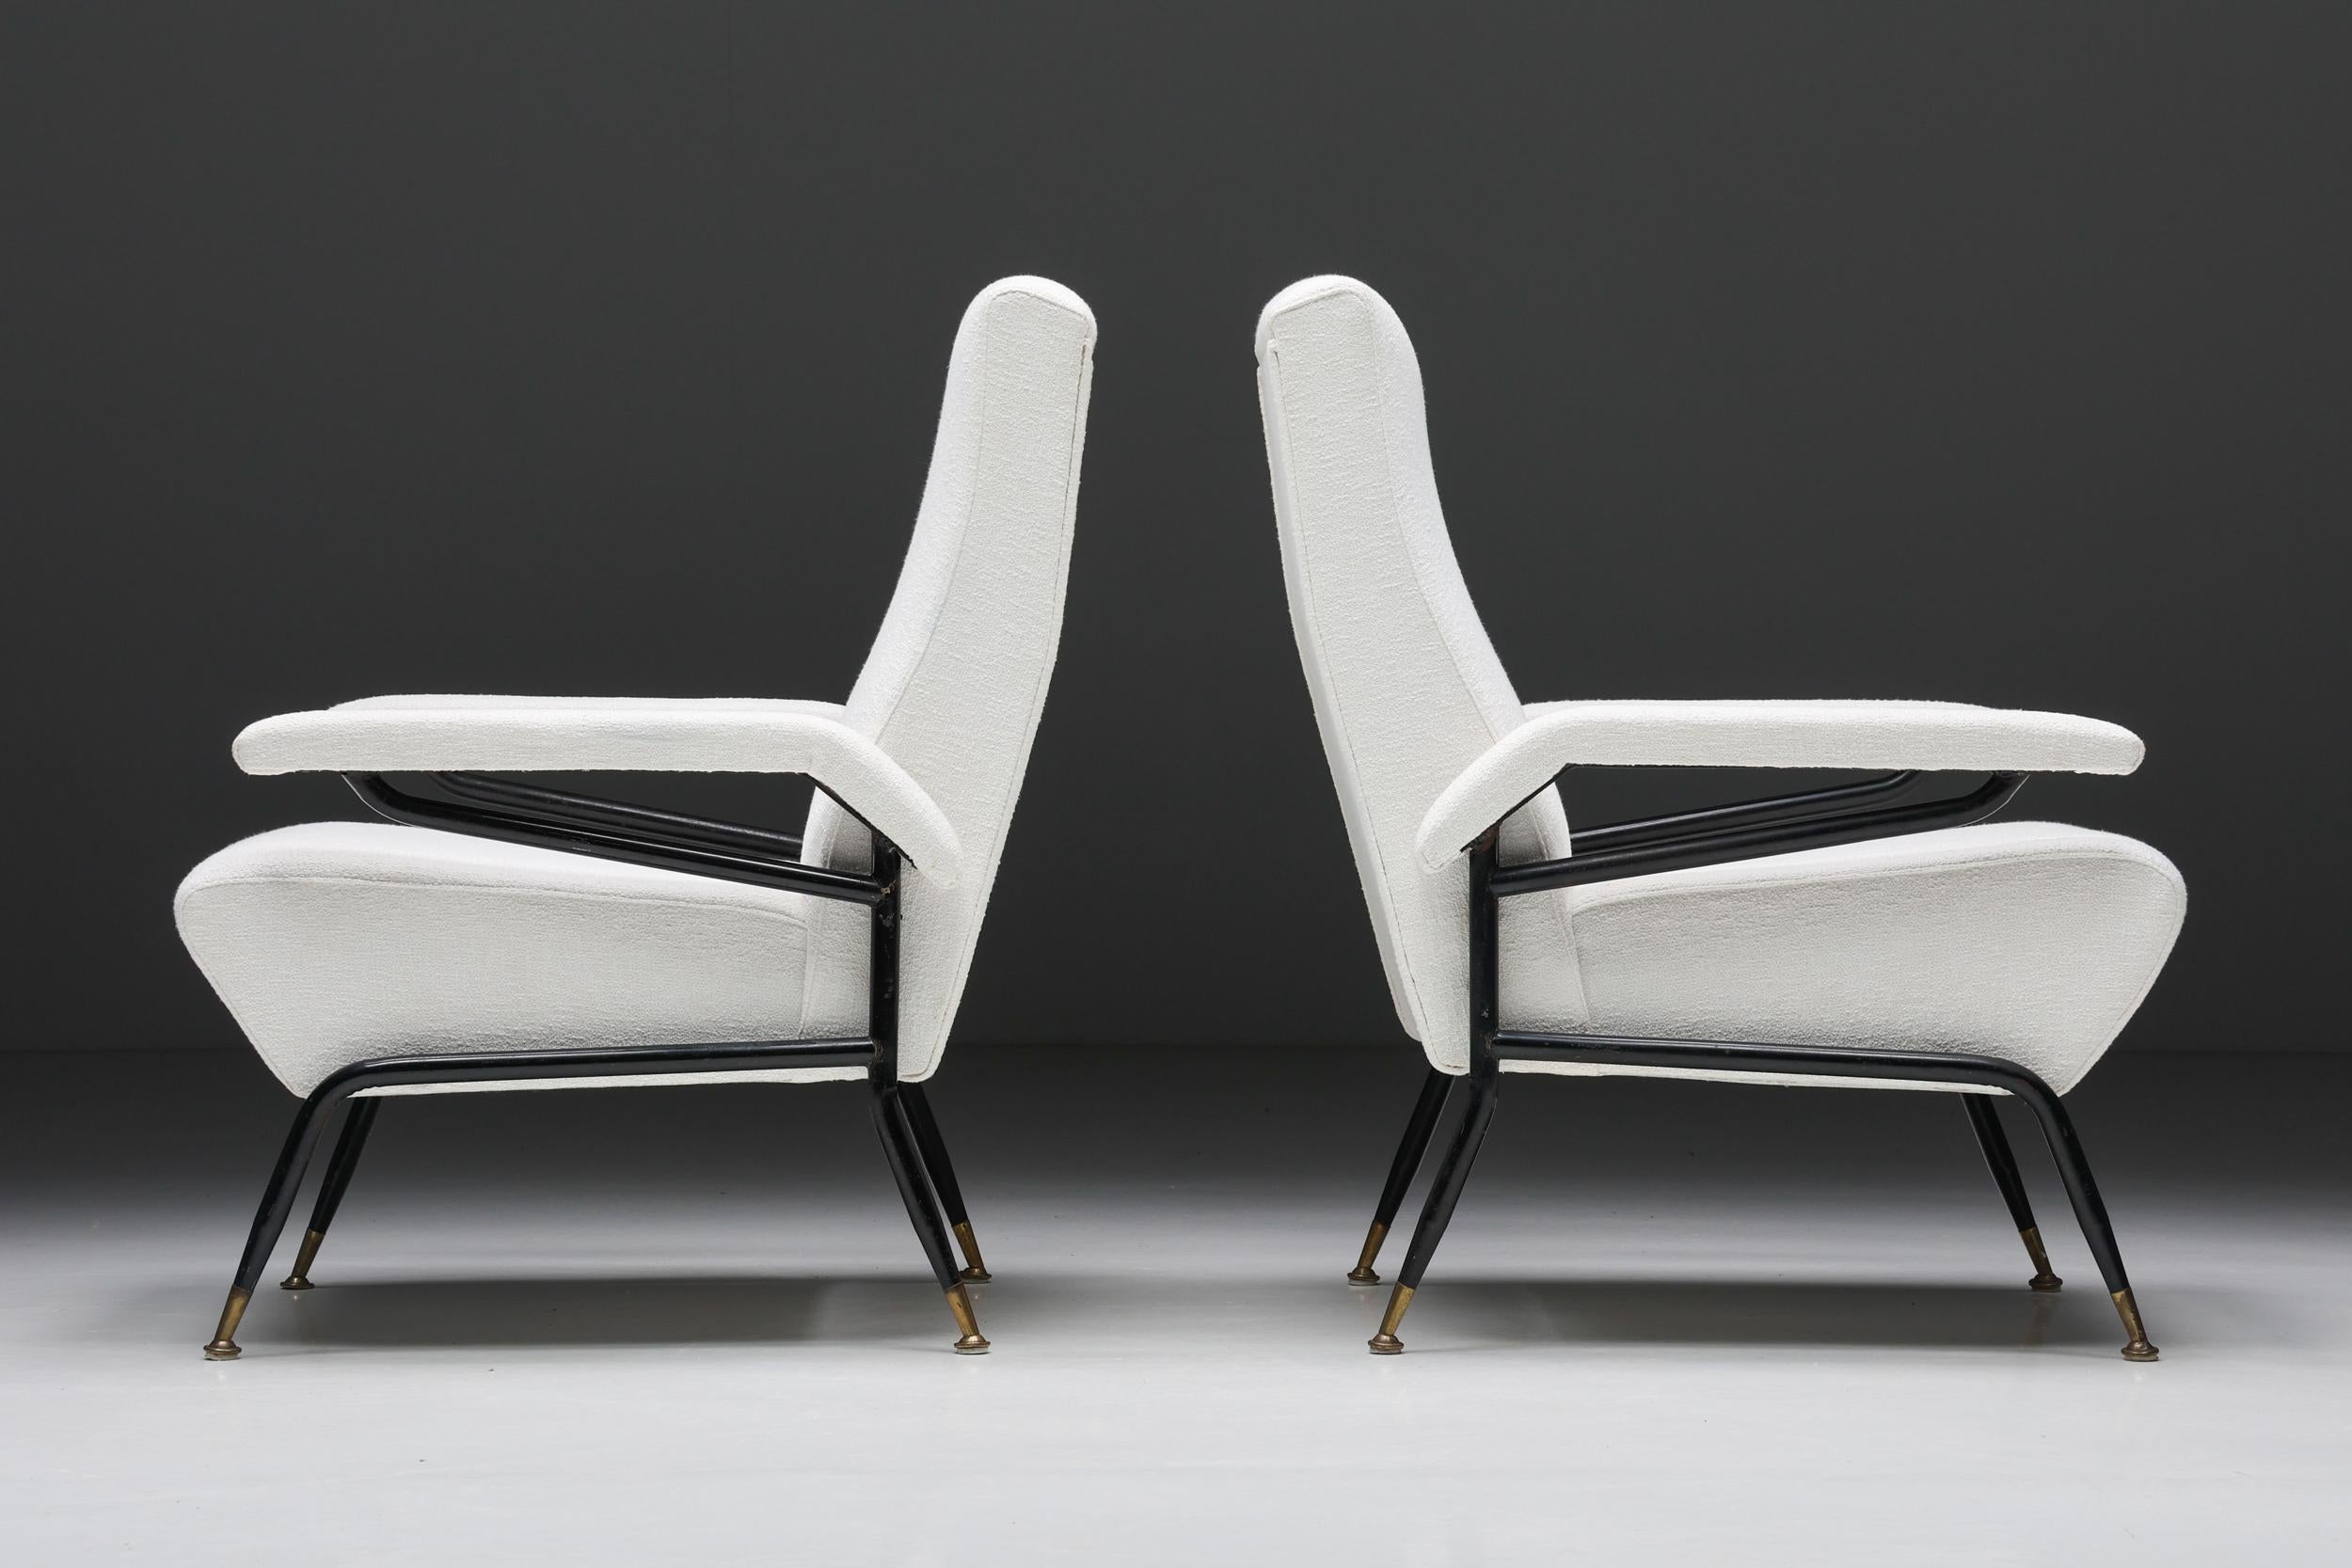 Modern Wim Rietveld Inspired Armchairs in Off-White Upholstery, Italy, 1970s For Sale